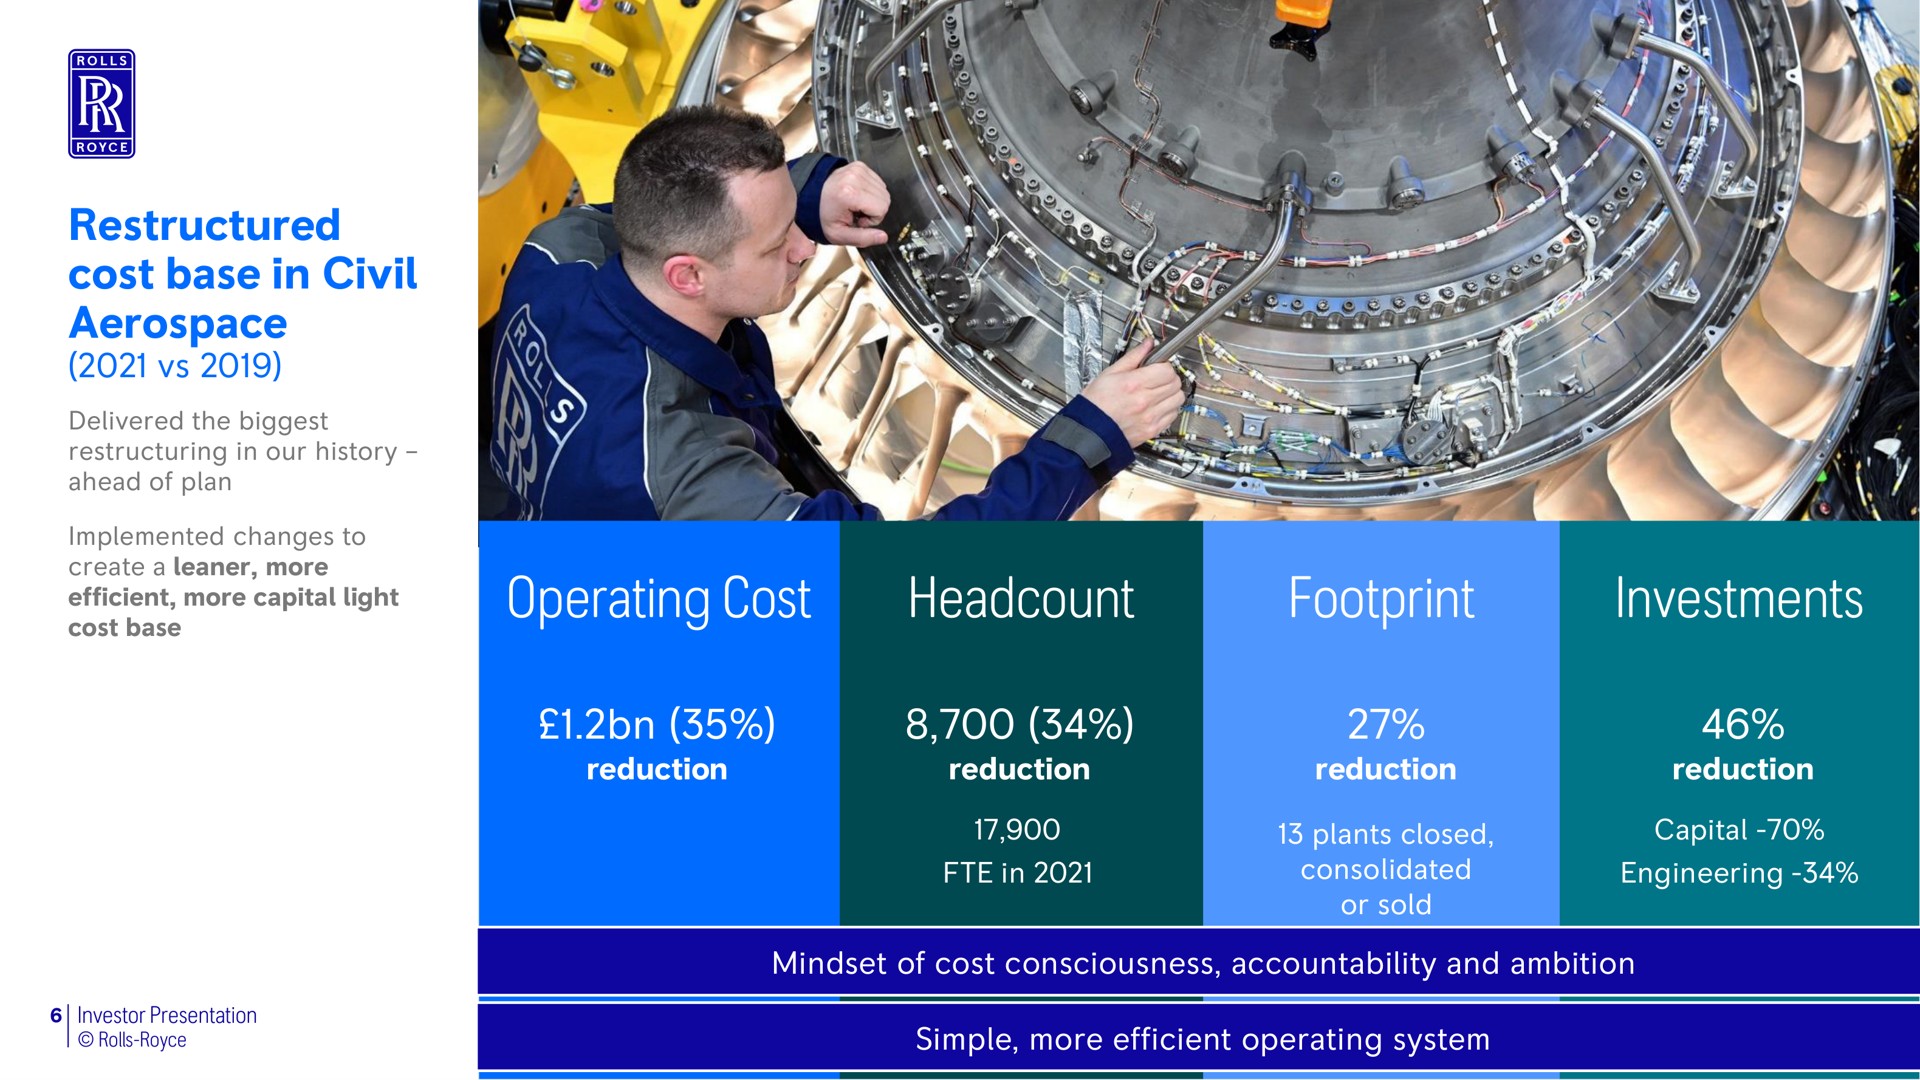 cost base in civil operating cost footprint investments efficient more capital light ces plants closed capital | Rolls-Royce Holdings